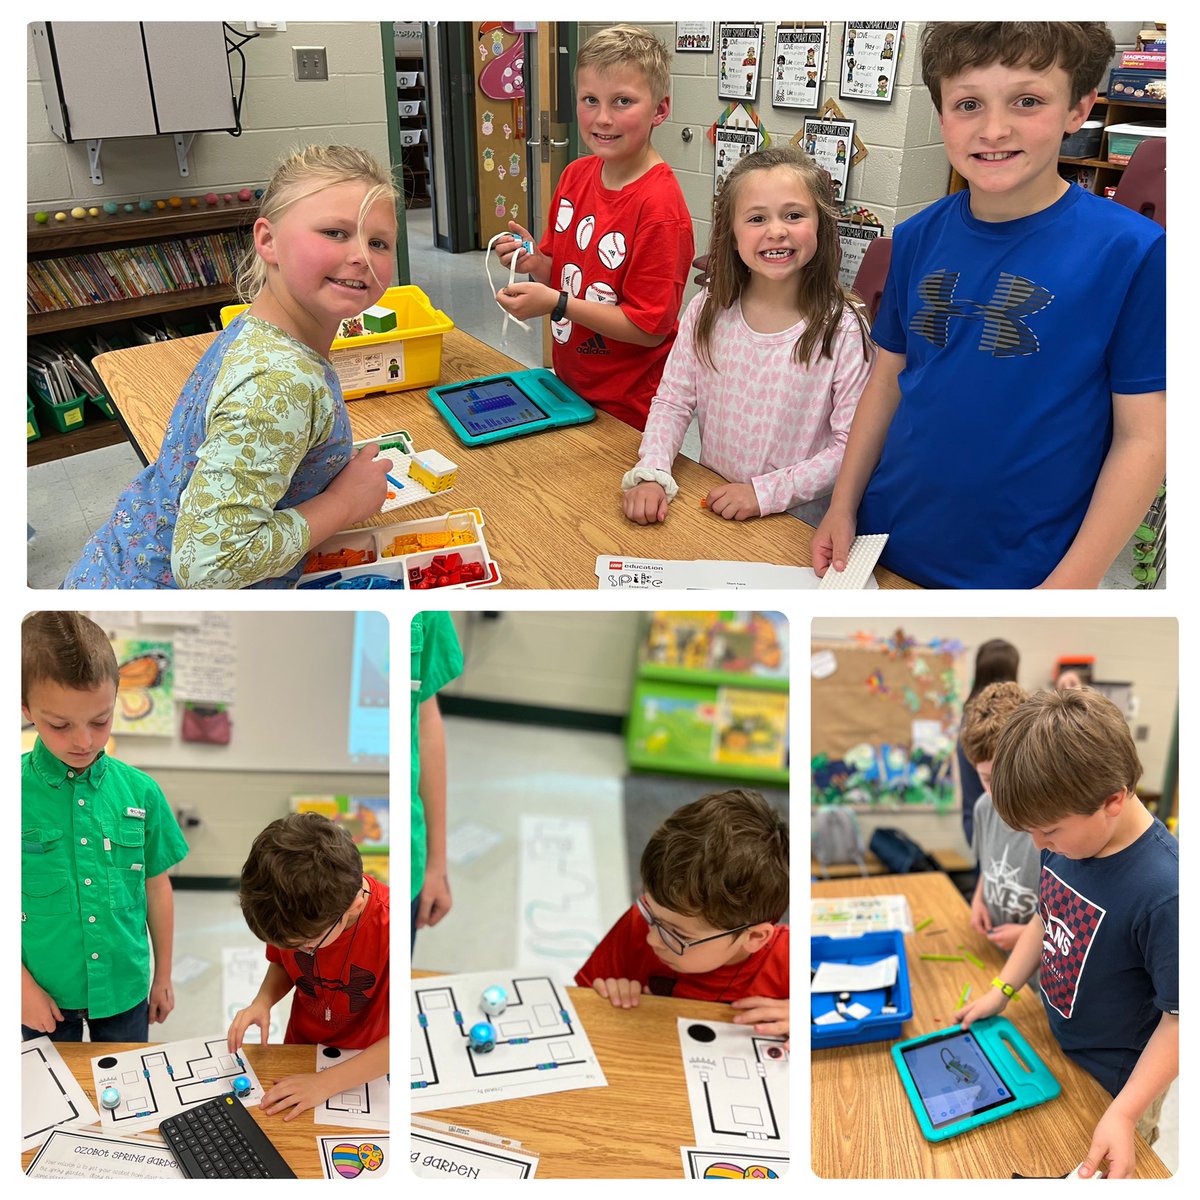 RT @MrsRiley_MVES: We’ve had two exciting meetings of Session 3 Exploring Coding Club! https://t.co/WXlCcfrziV